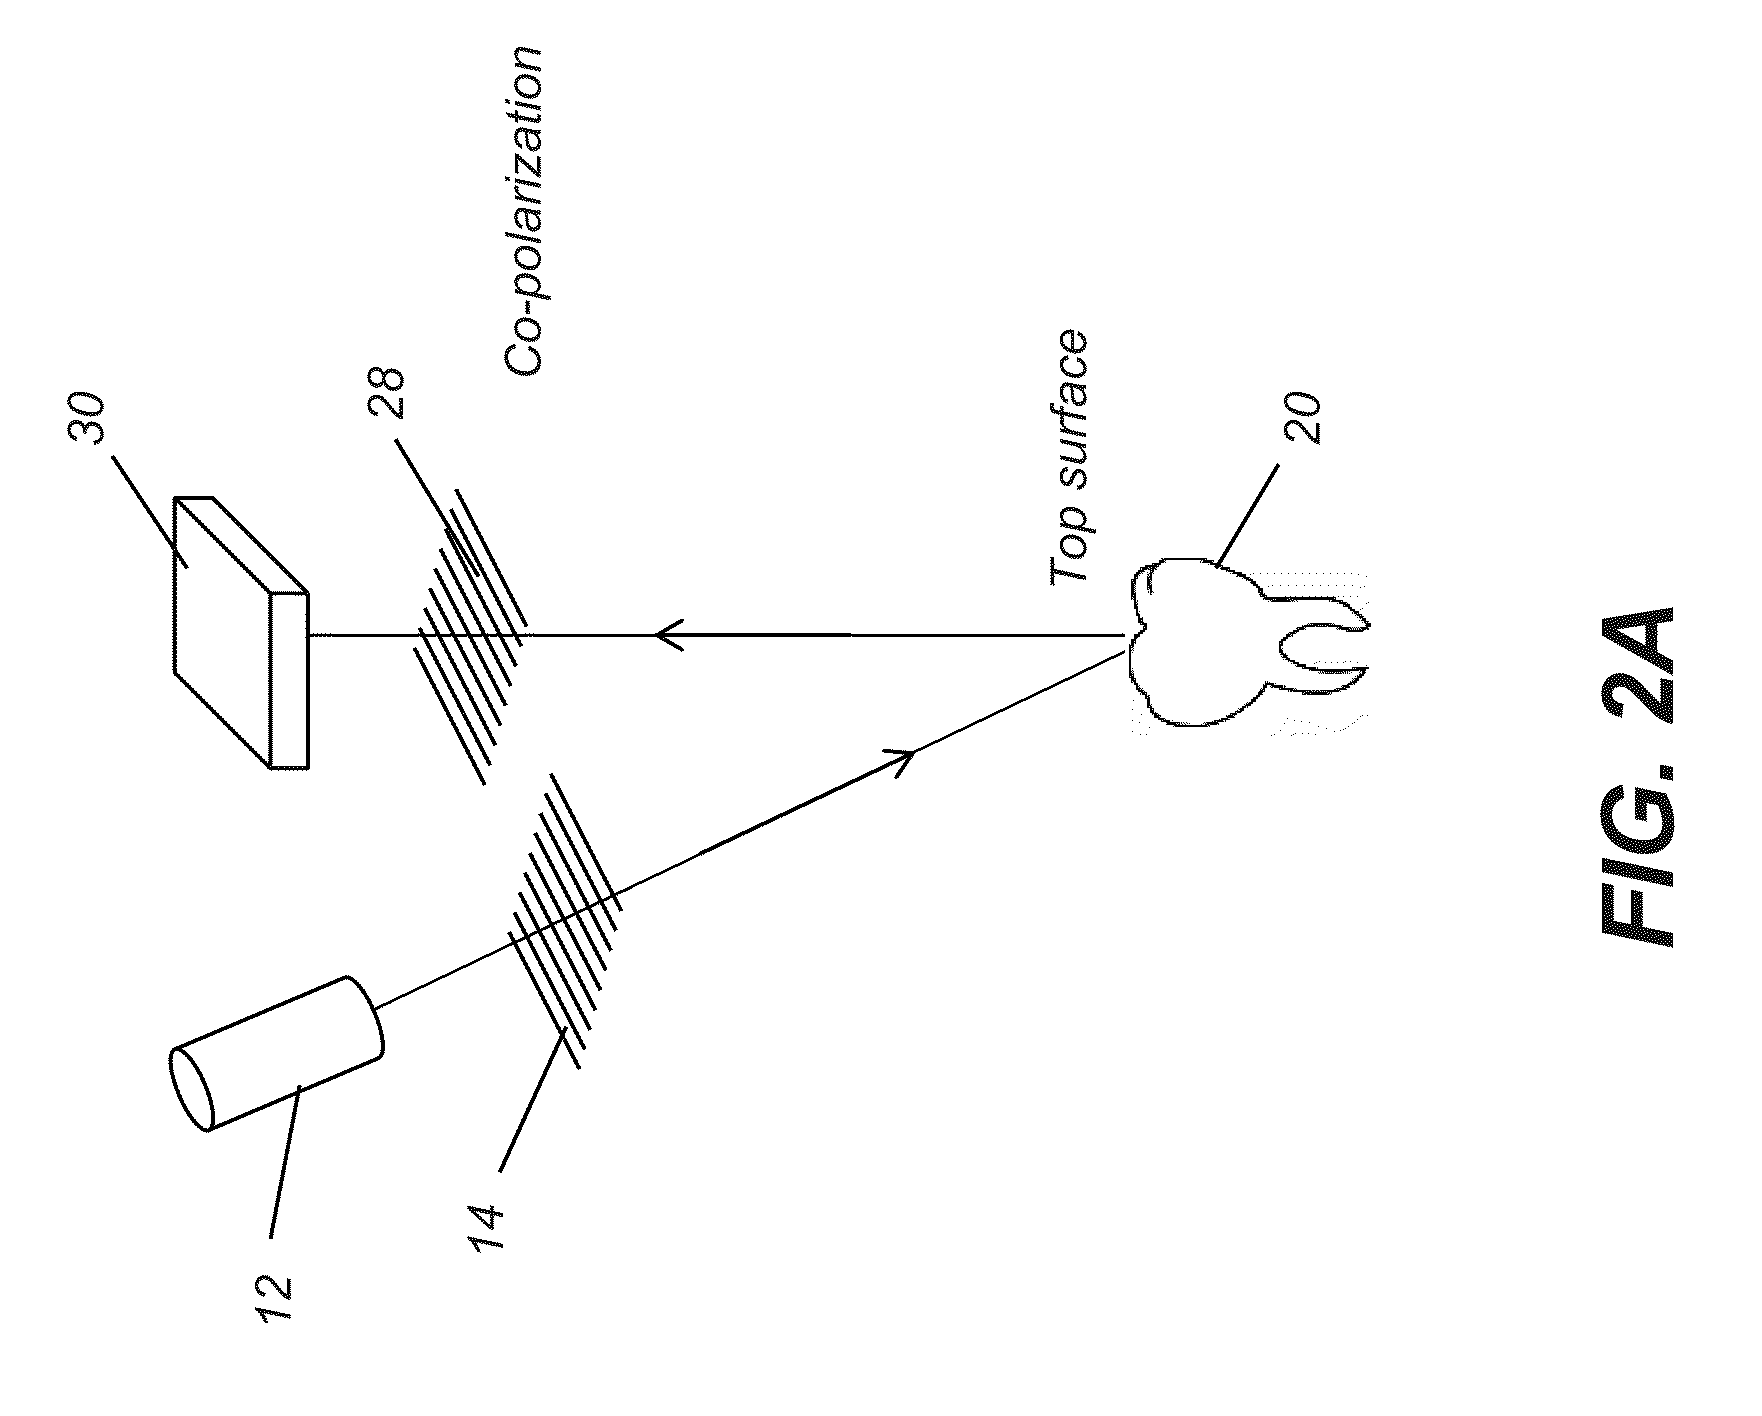 System and method for detecting tooth cracks